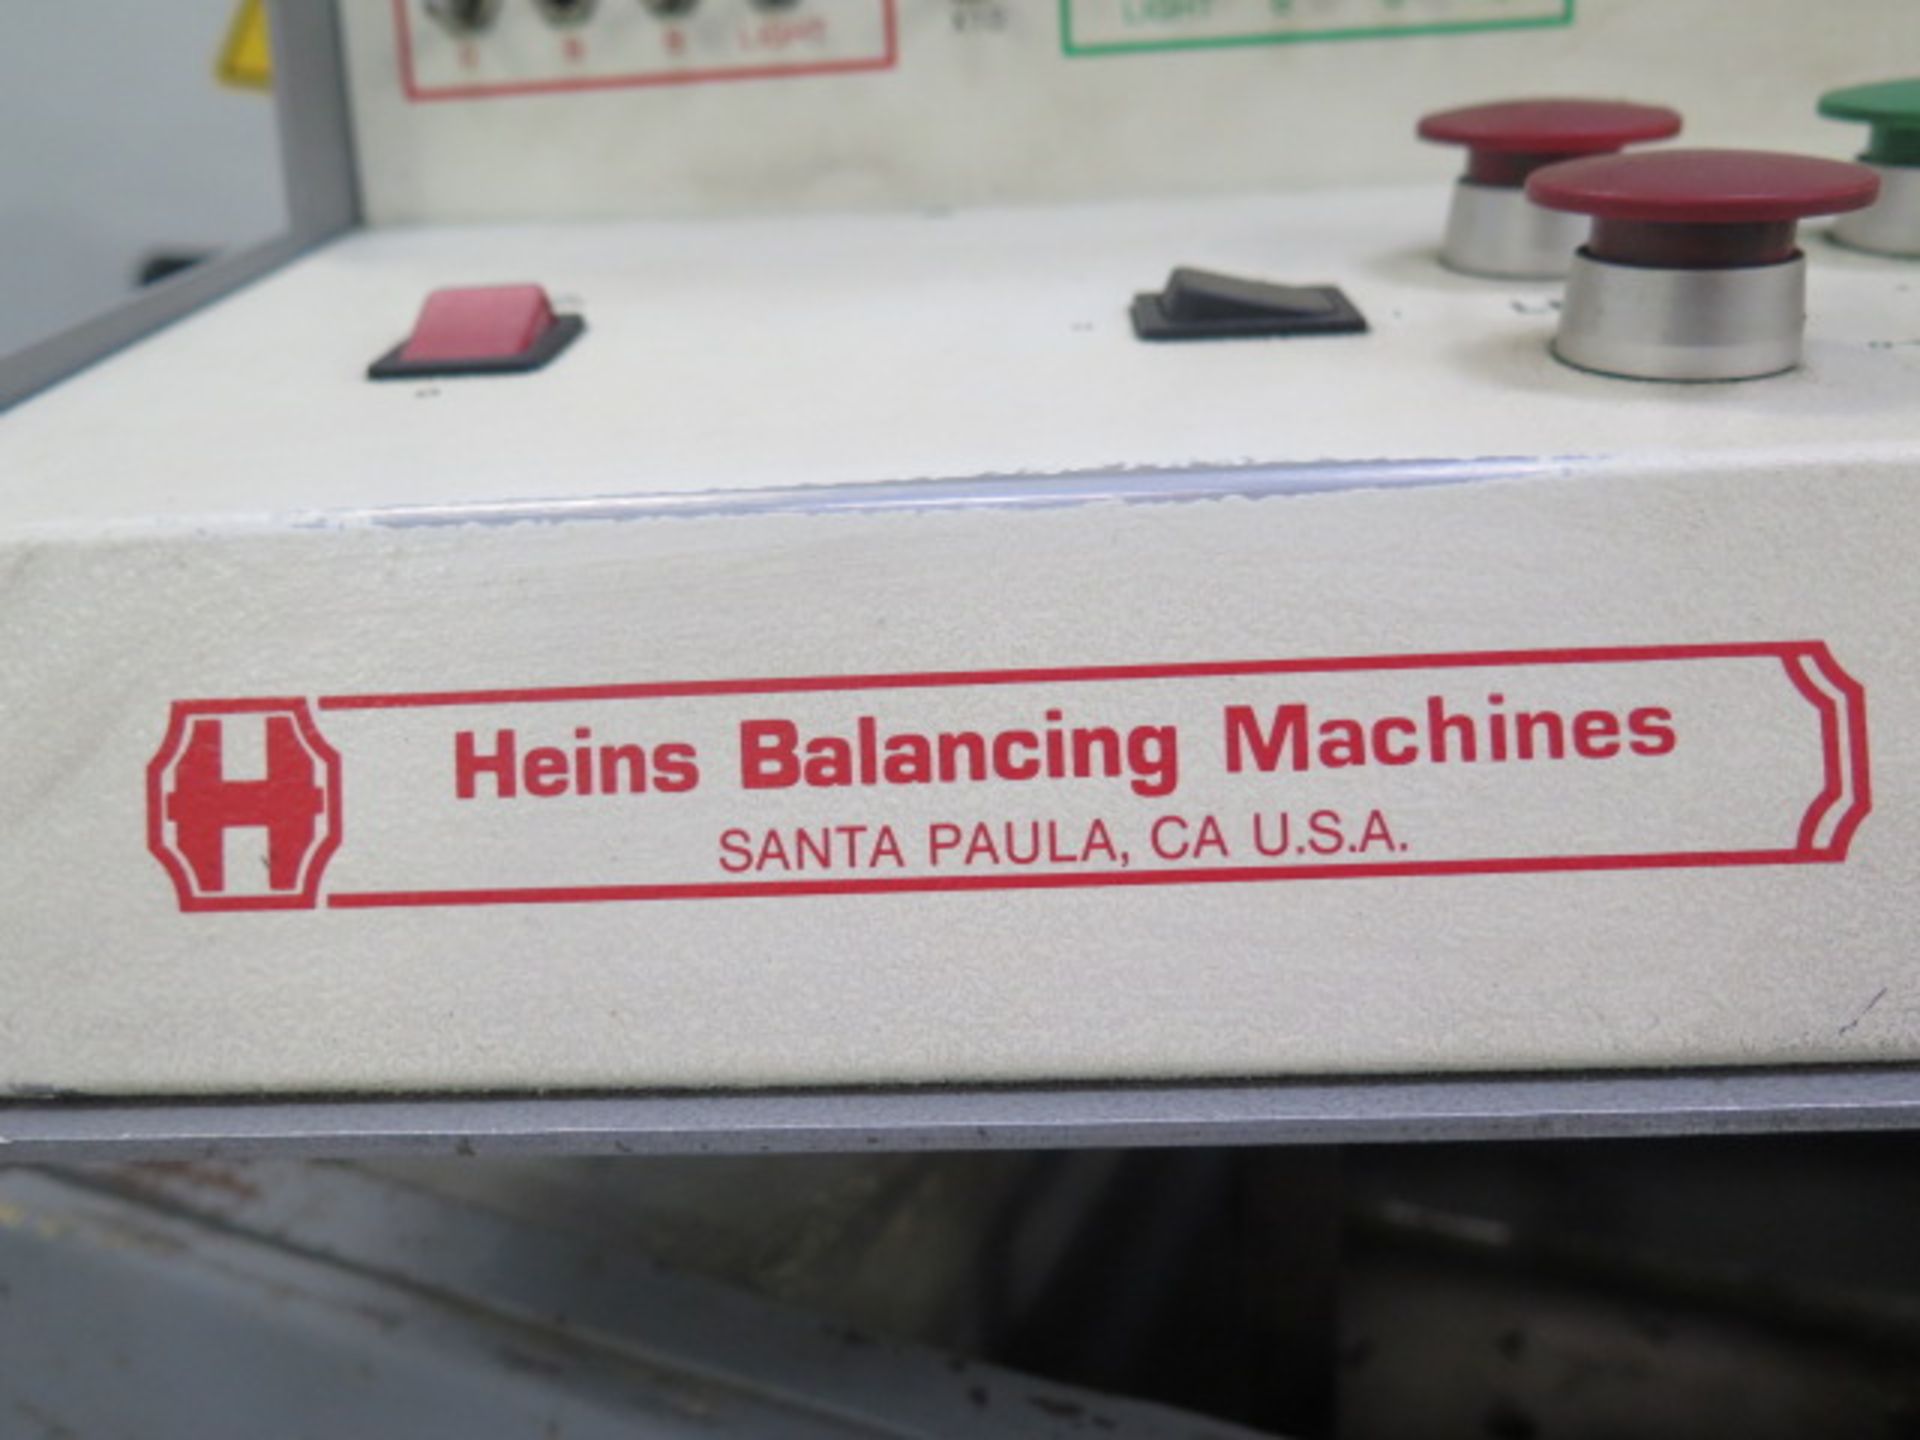 Heins Balancing Machines mdl. 80 23 6 Precision Balancing Machine s/n 8025G-772 w/ Left and Right - Image 8 of 8